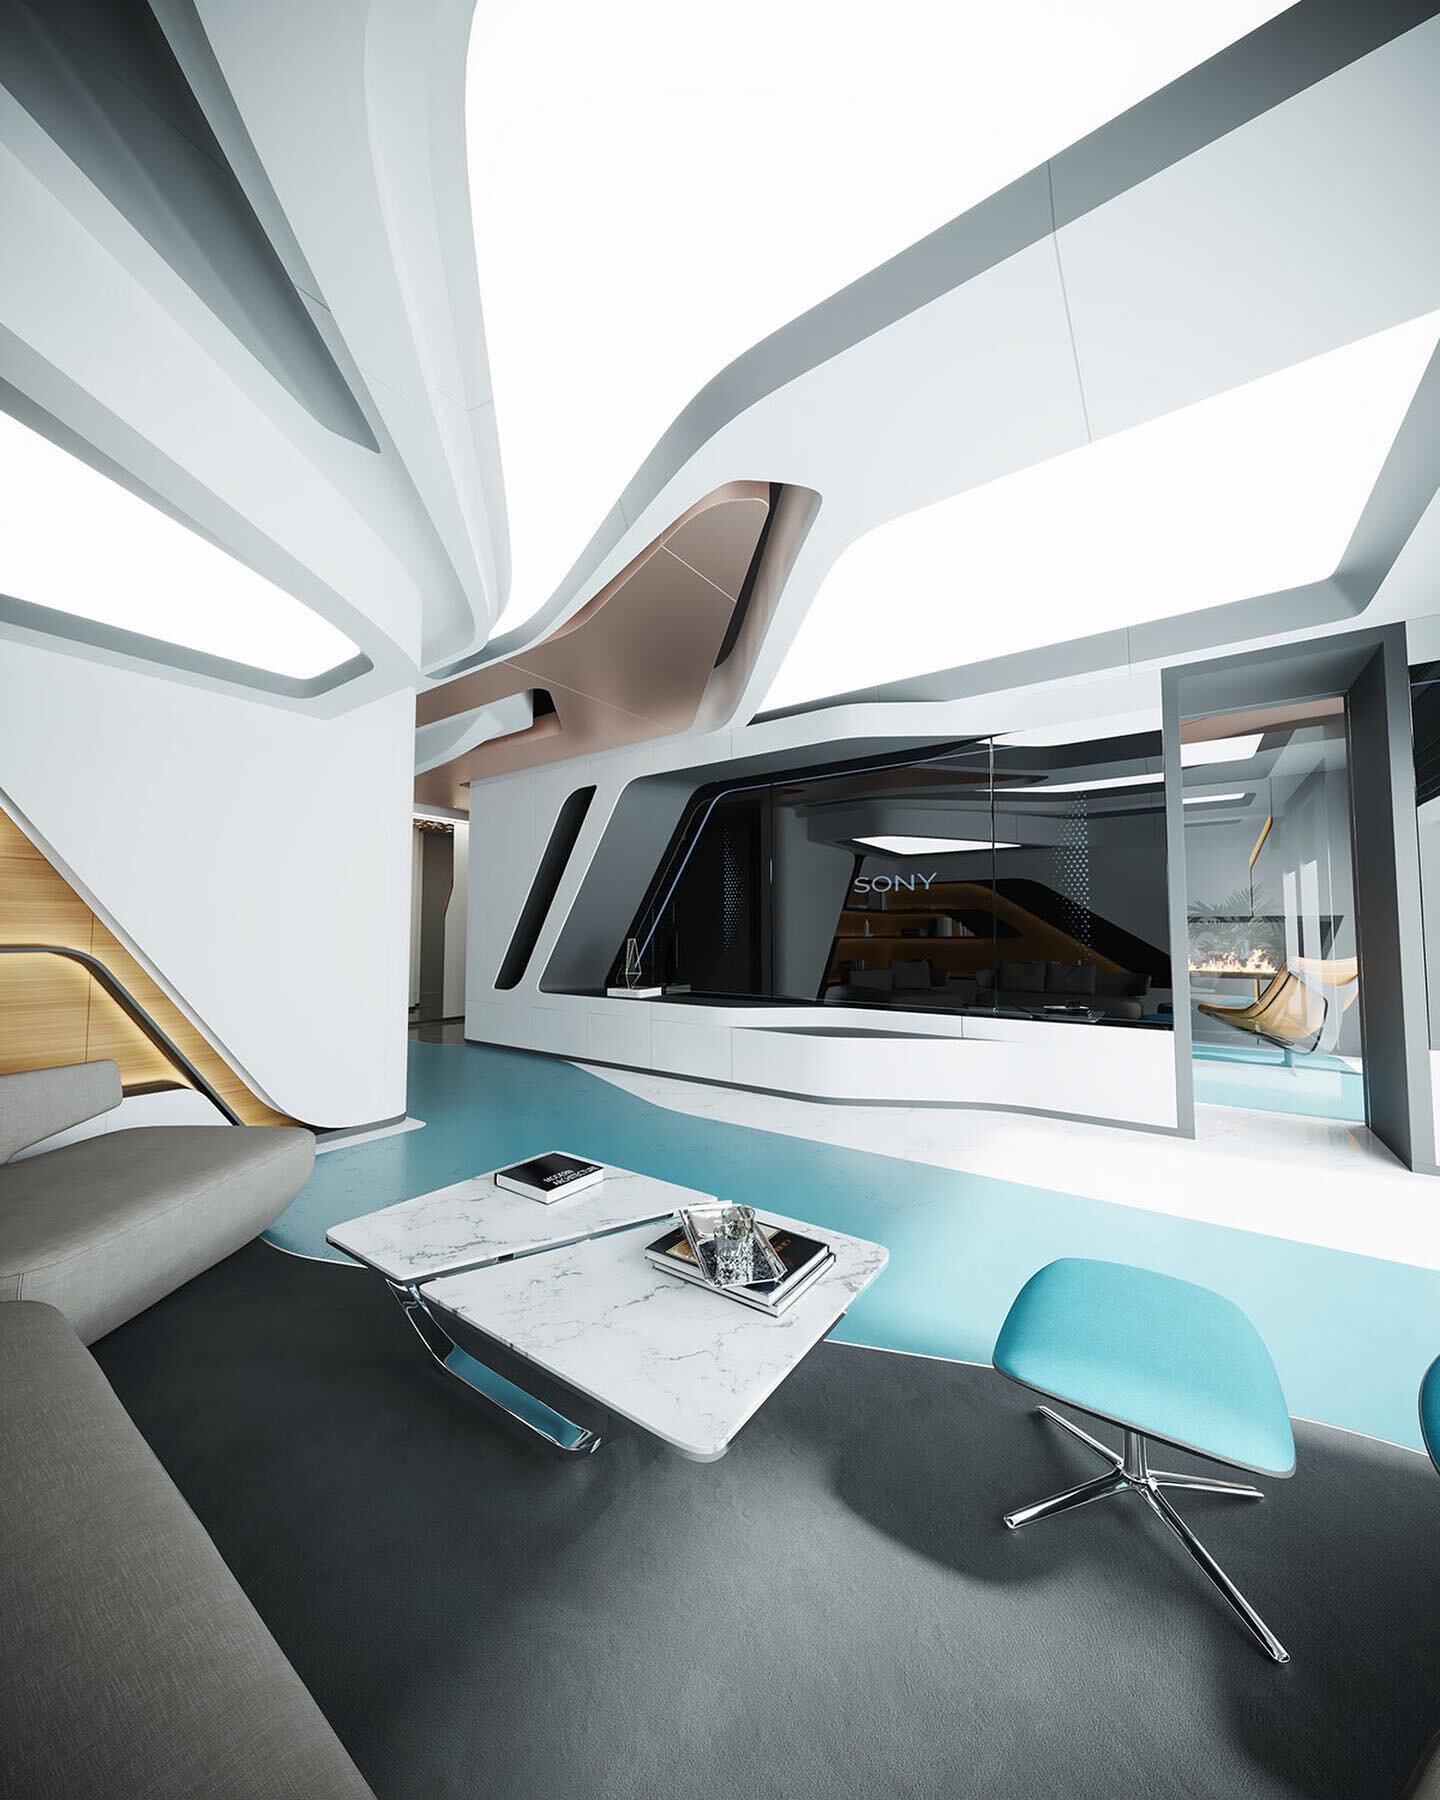 Step into the future with architect Andrey Chudinow's visionary home design. Embrace circuit board-inspired aesthetics, space-age TV walls, and bedrooms ready for intergalactic dreams. From aqua blue elegance to dramatic dark themes, each stop is a j